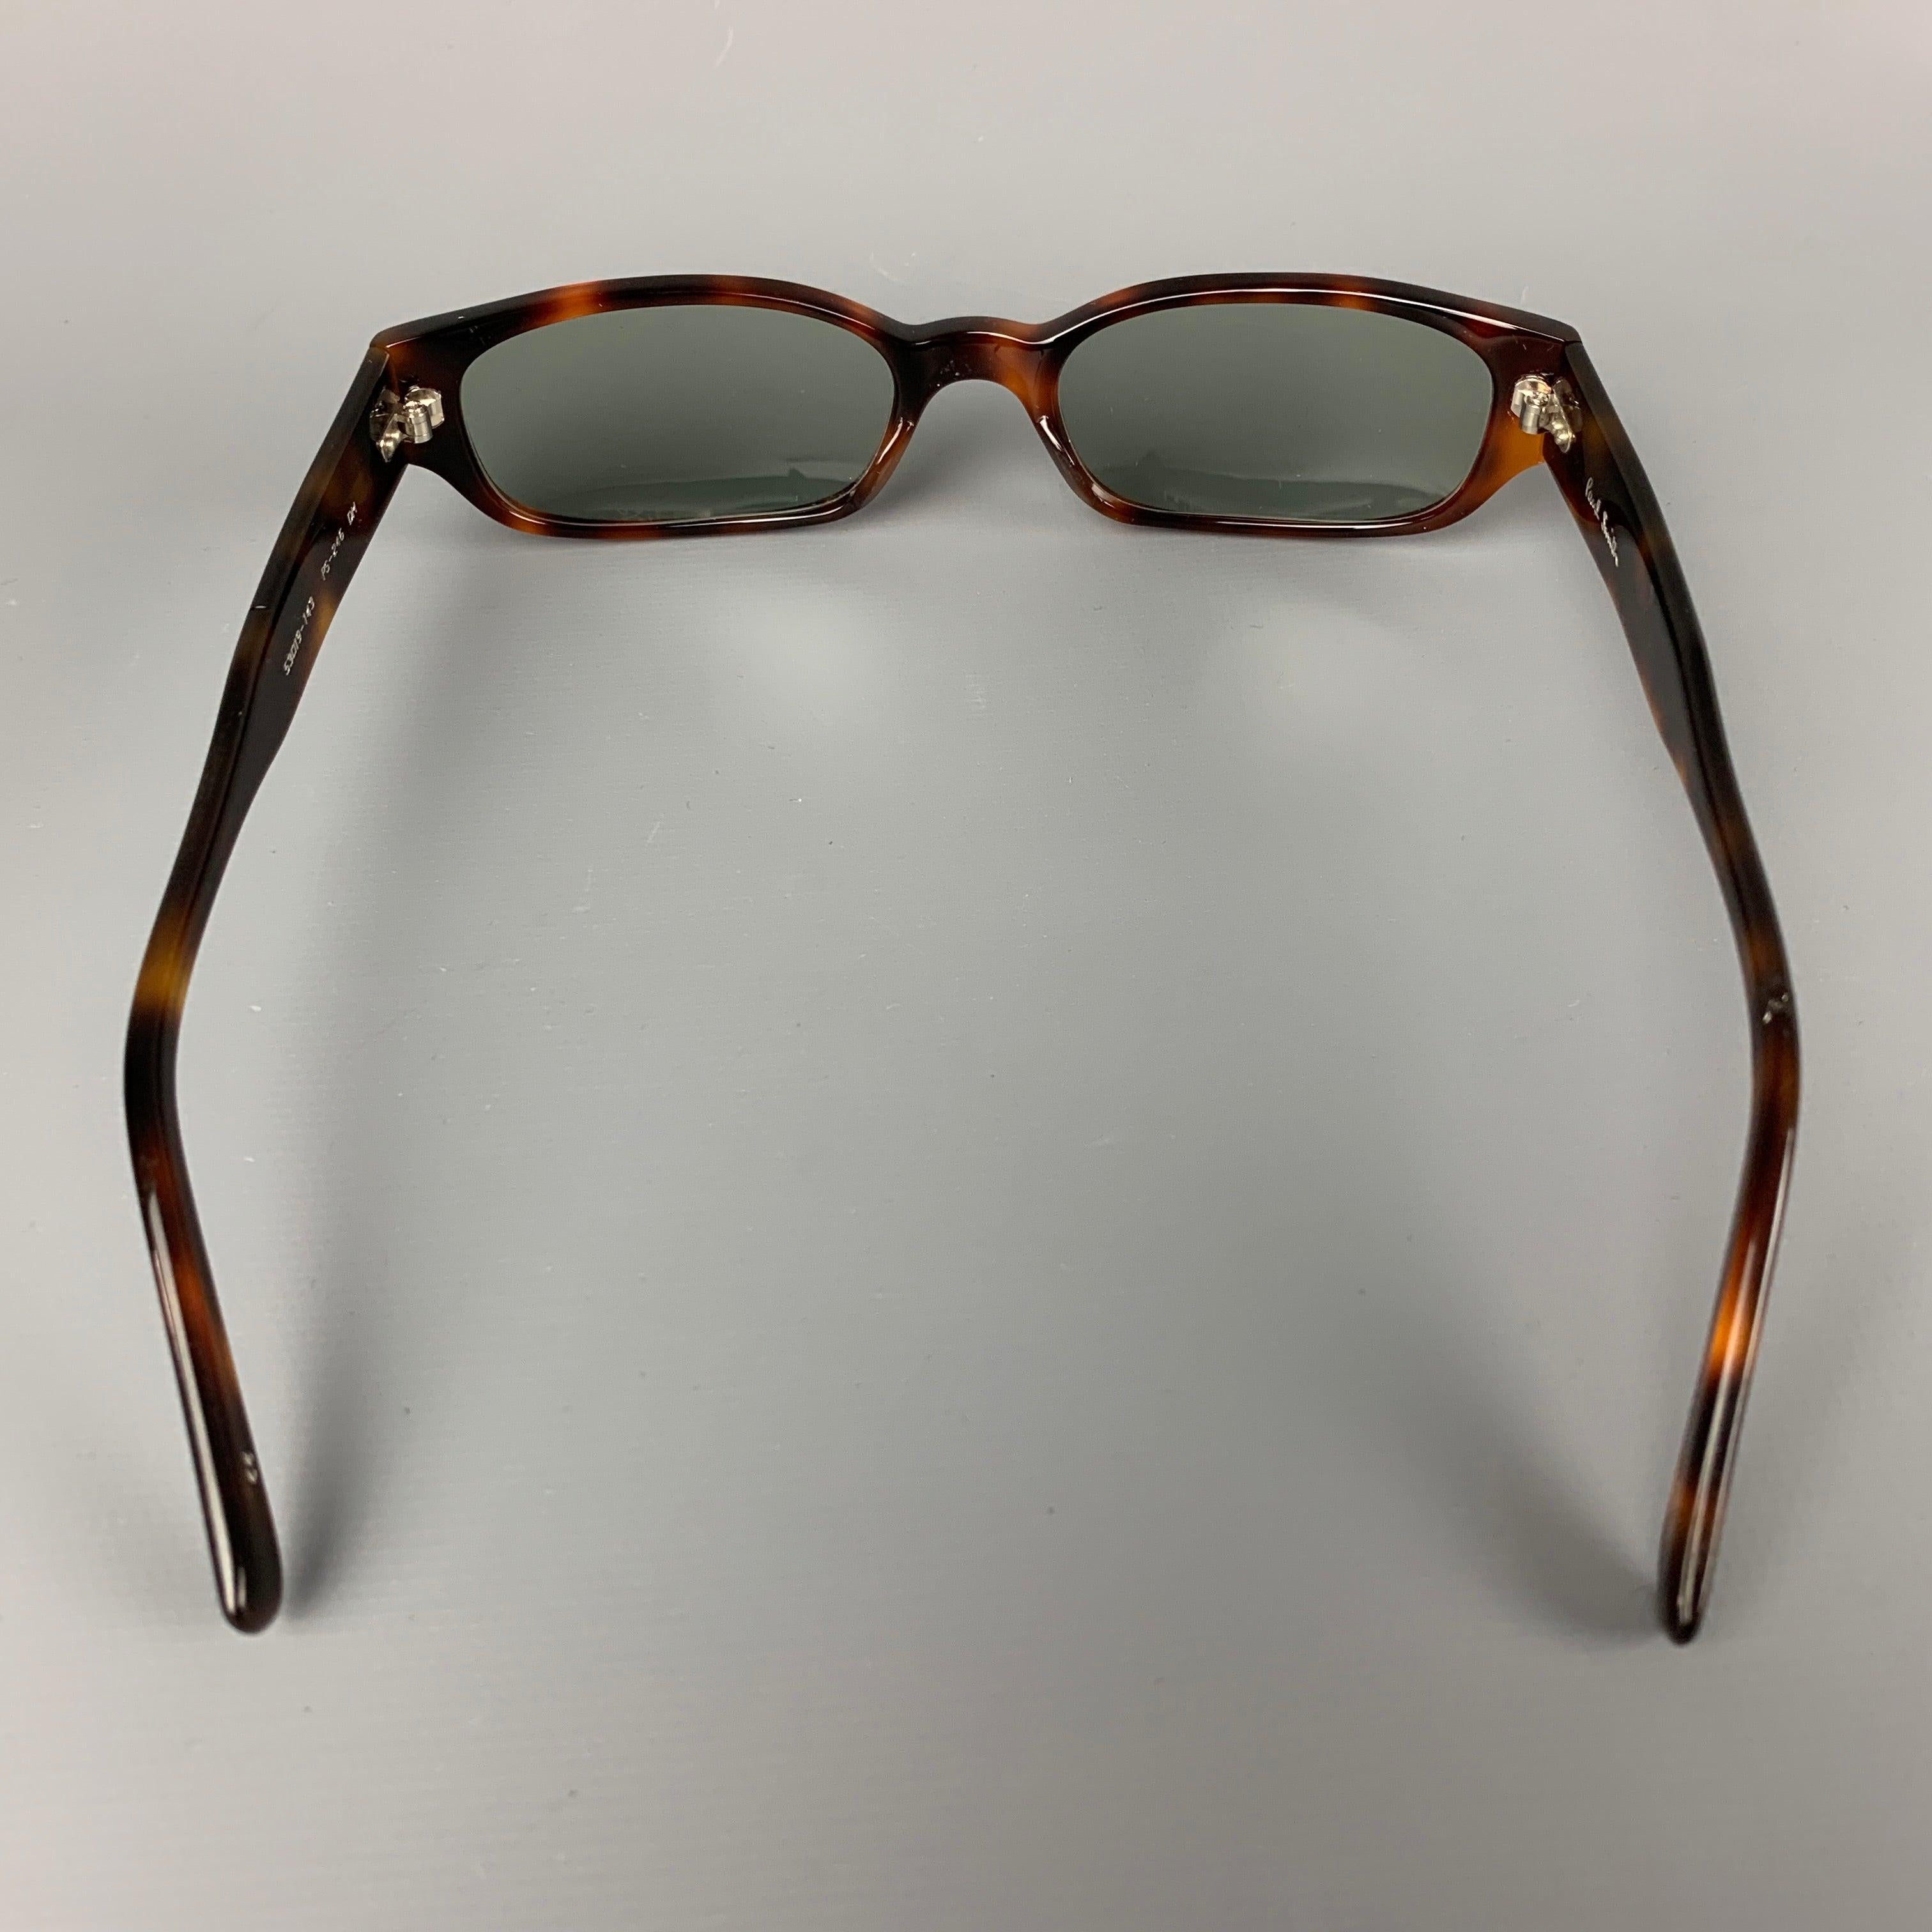 PAUL SMITH Brown Tortoiseshell Acetate Sunglasses & Eyewear In Good Condition For Sale In San Francisco, CA